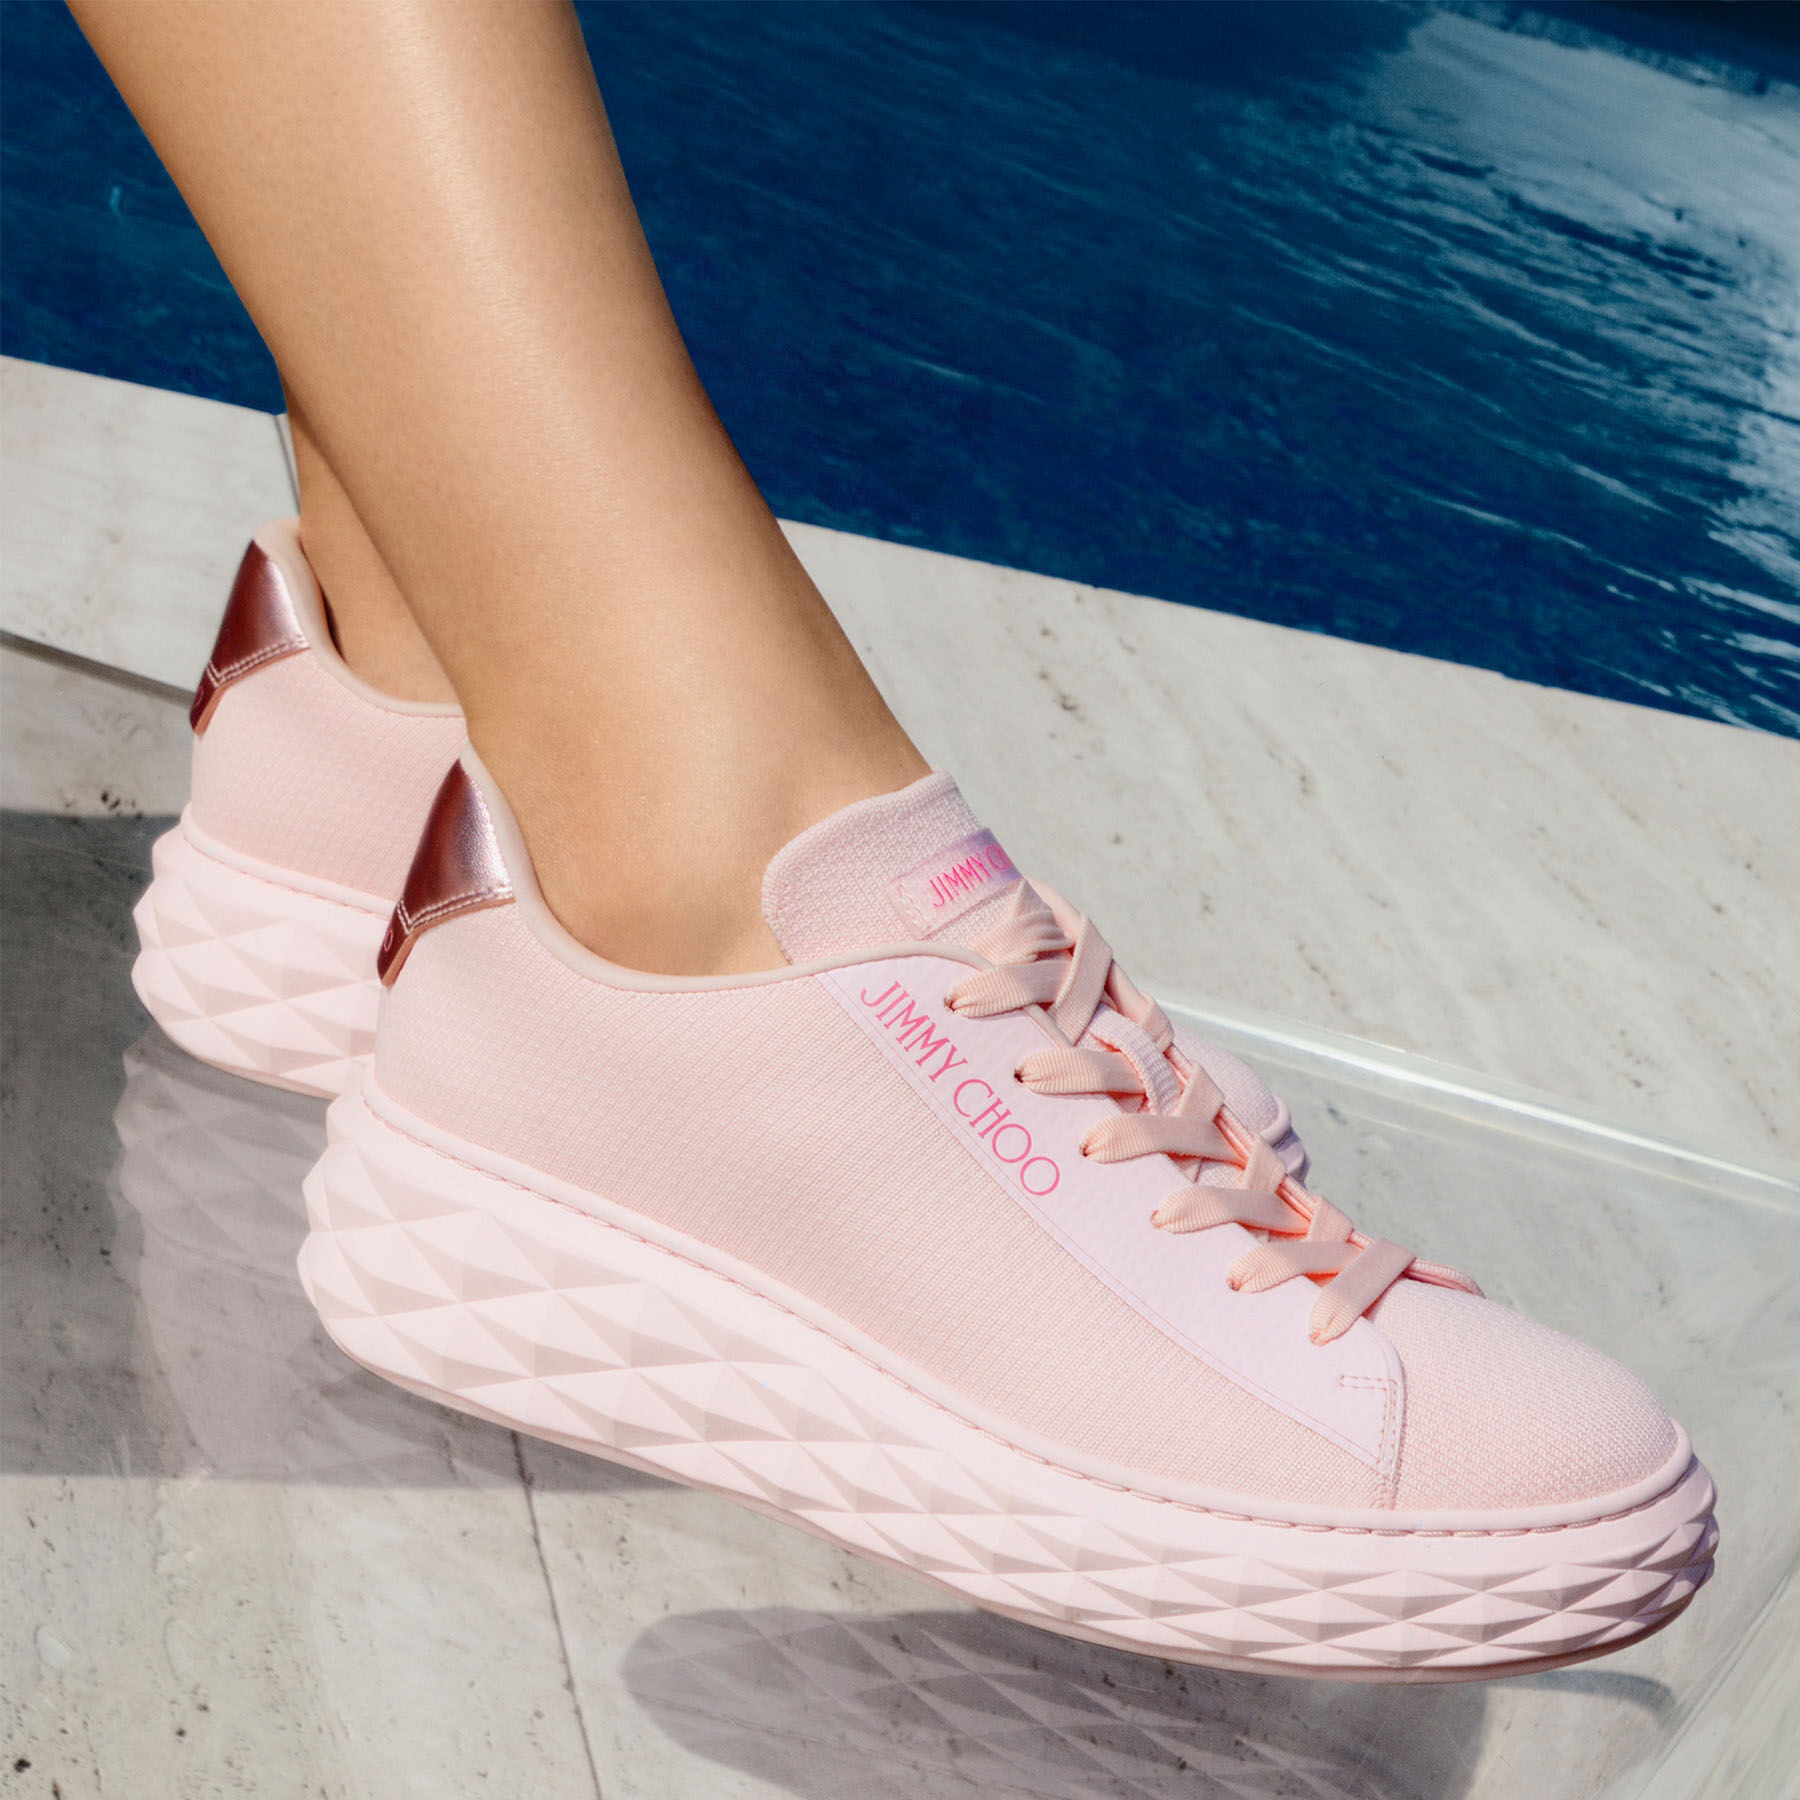 Diamond Light Maxi/f
Powder Pink Knit Low-Top Trainers with Platform Sole - 8